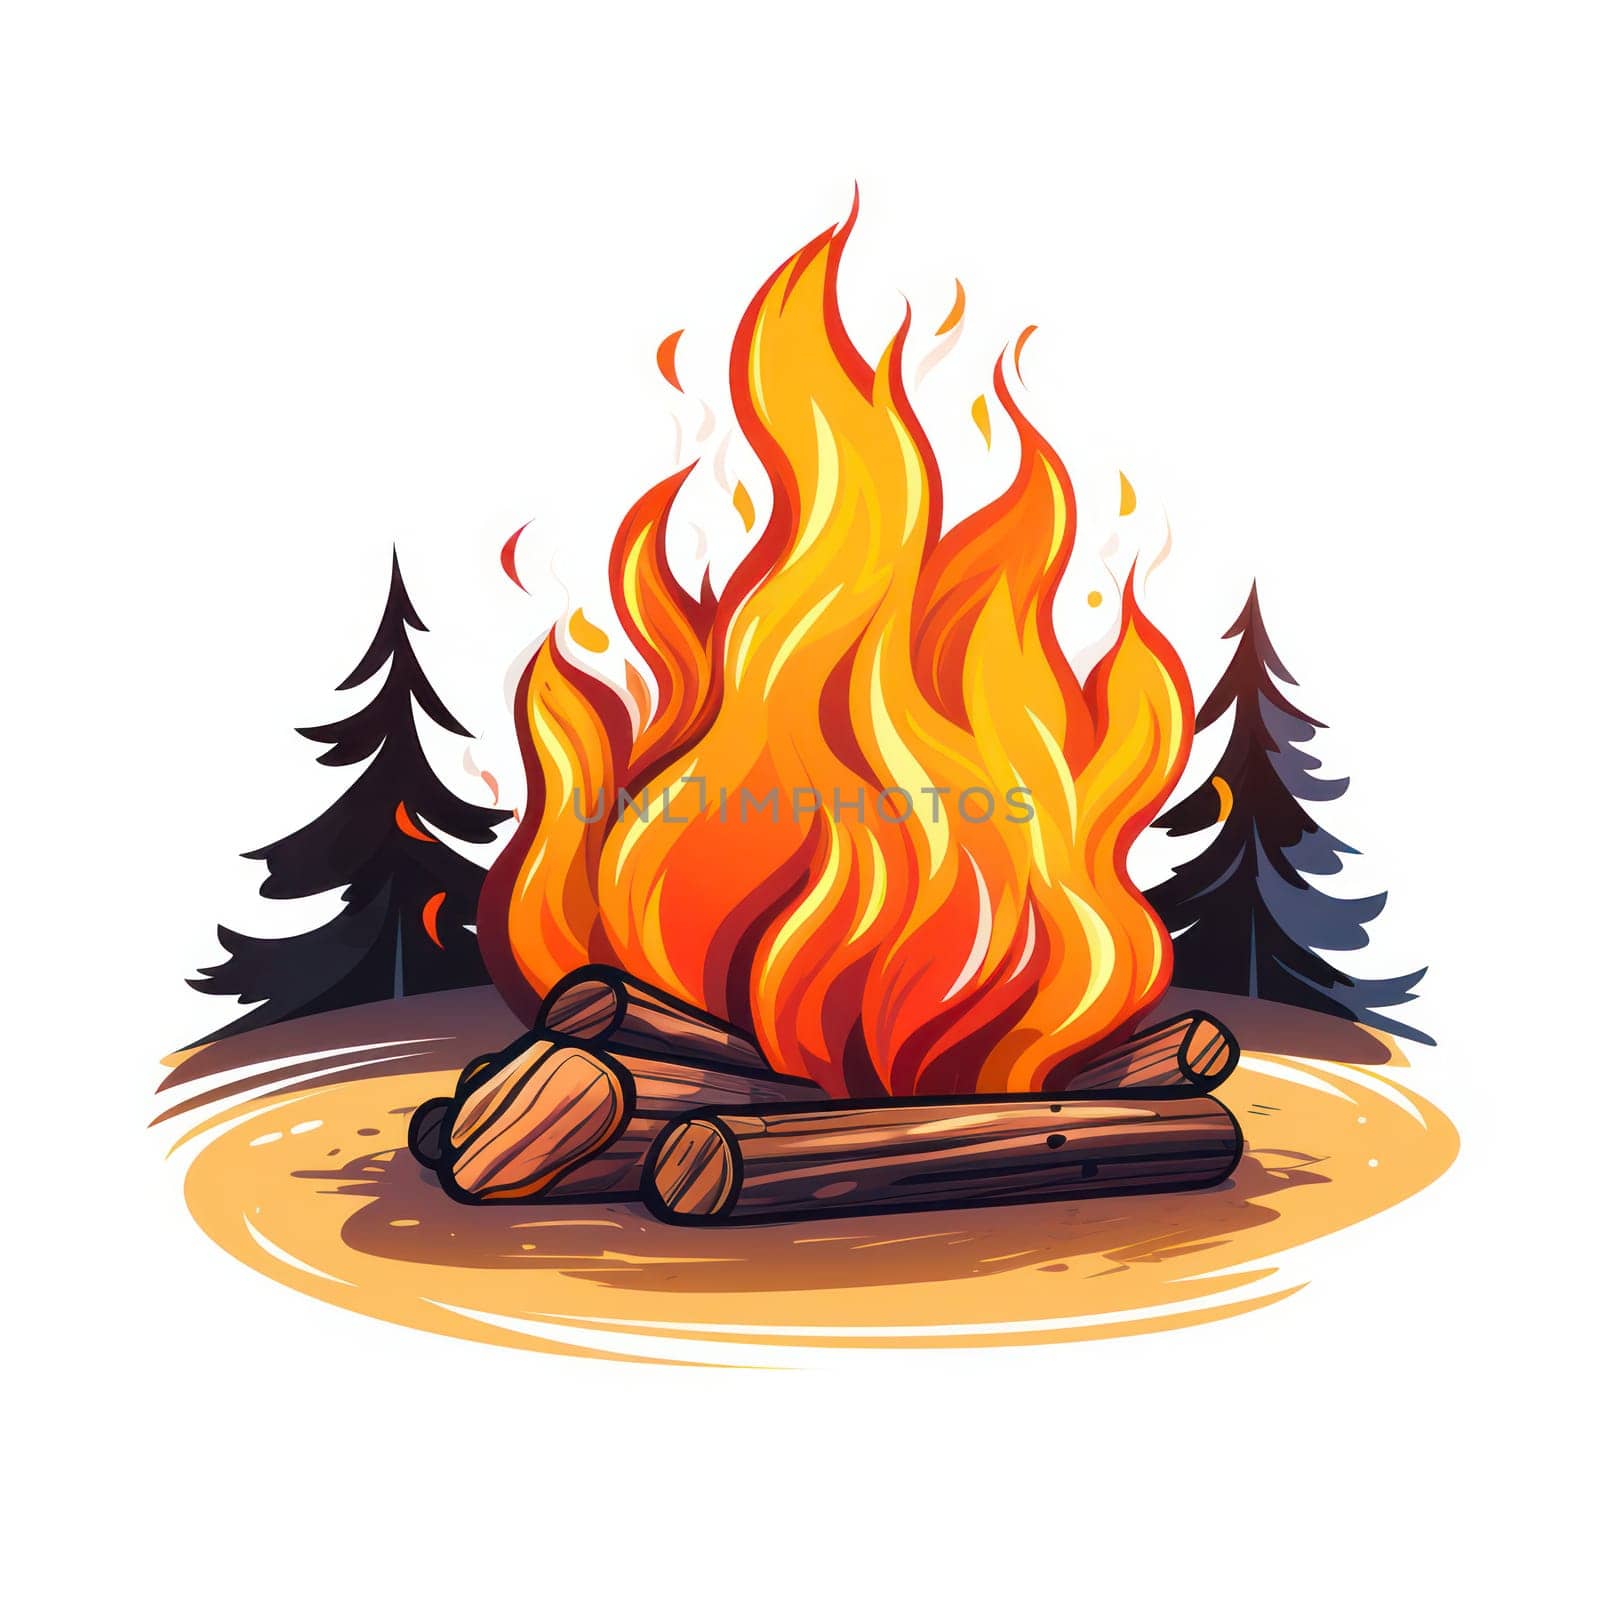 Flaming Campfire in Nature: A Warm, Illustrative Bonfire on a Summer Night